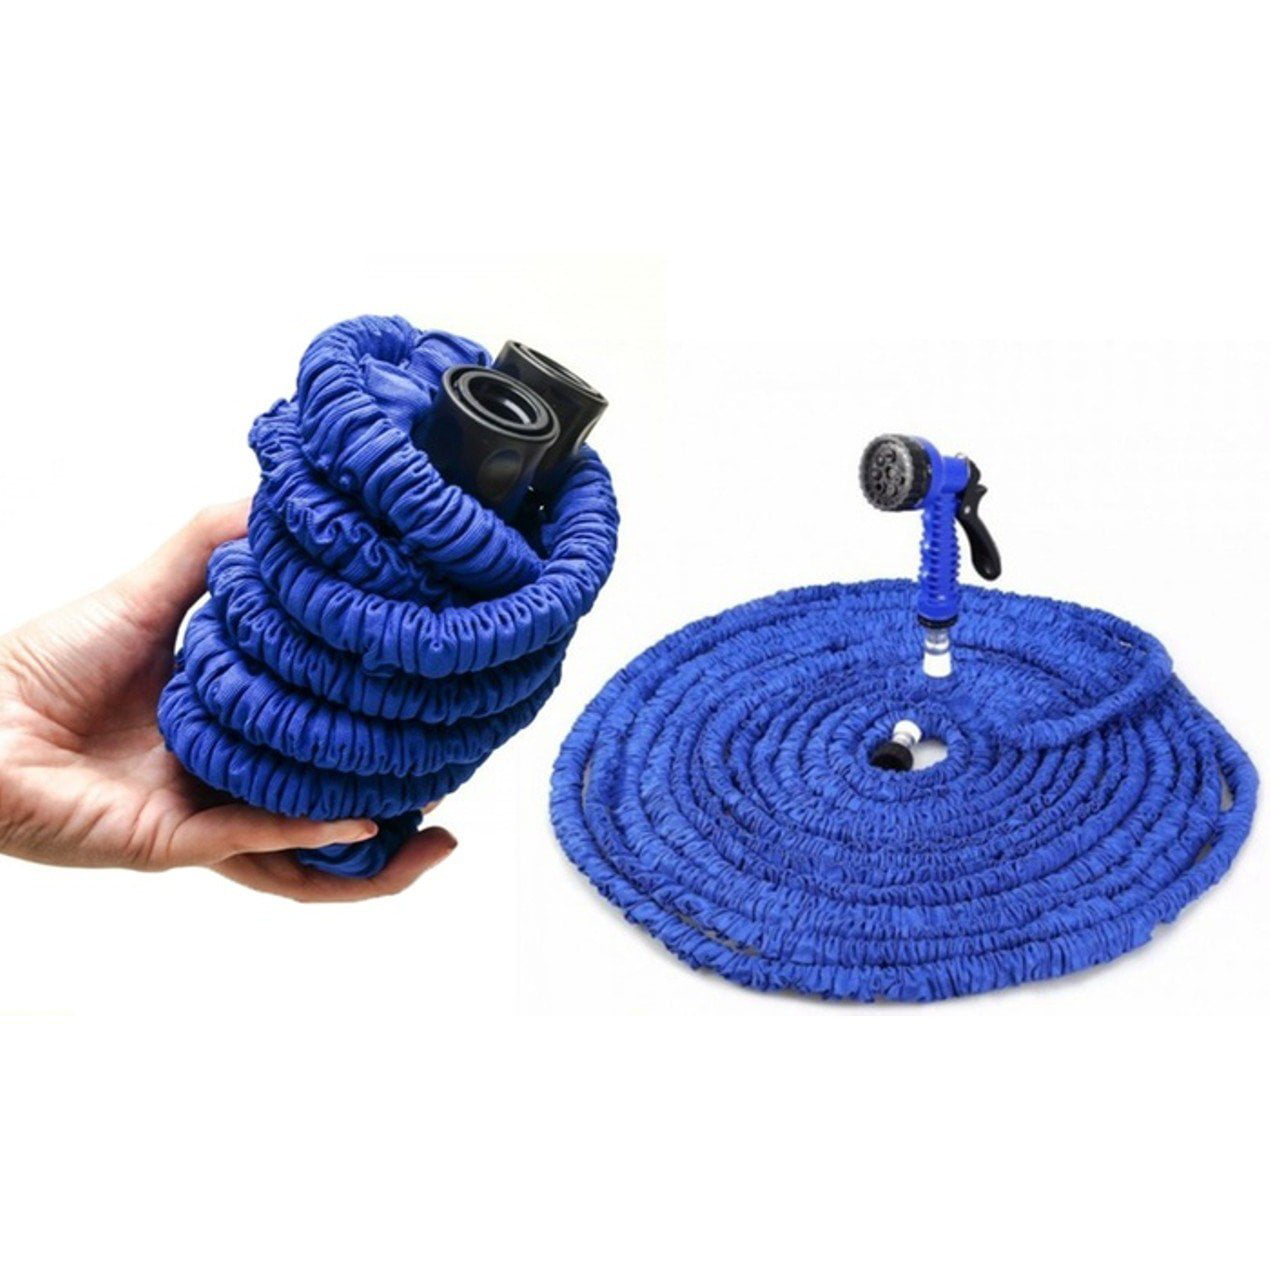 Expandable Flexible Water Garden Hose - (25ft - 100ft) Expanding Water Hose with 7 Setting-Spray Nozzle